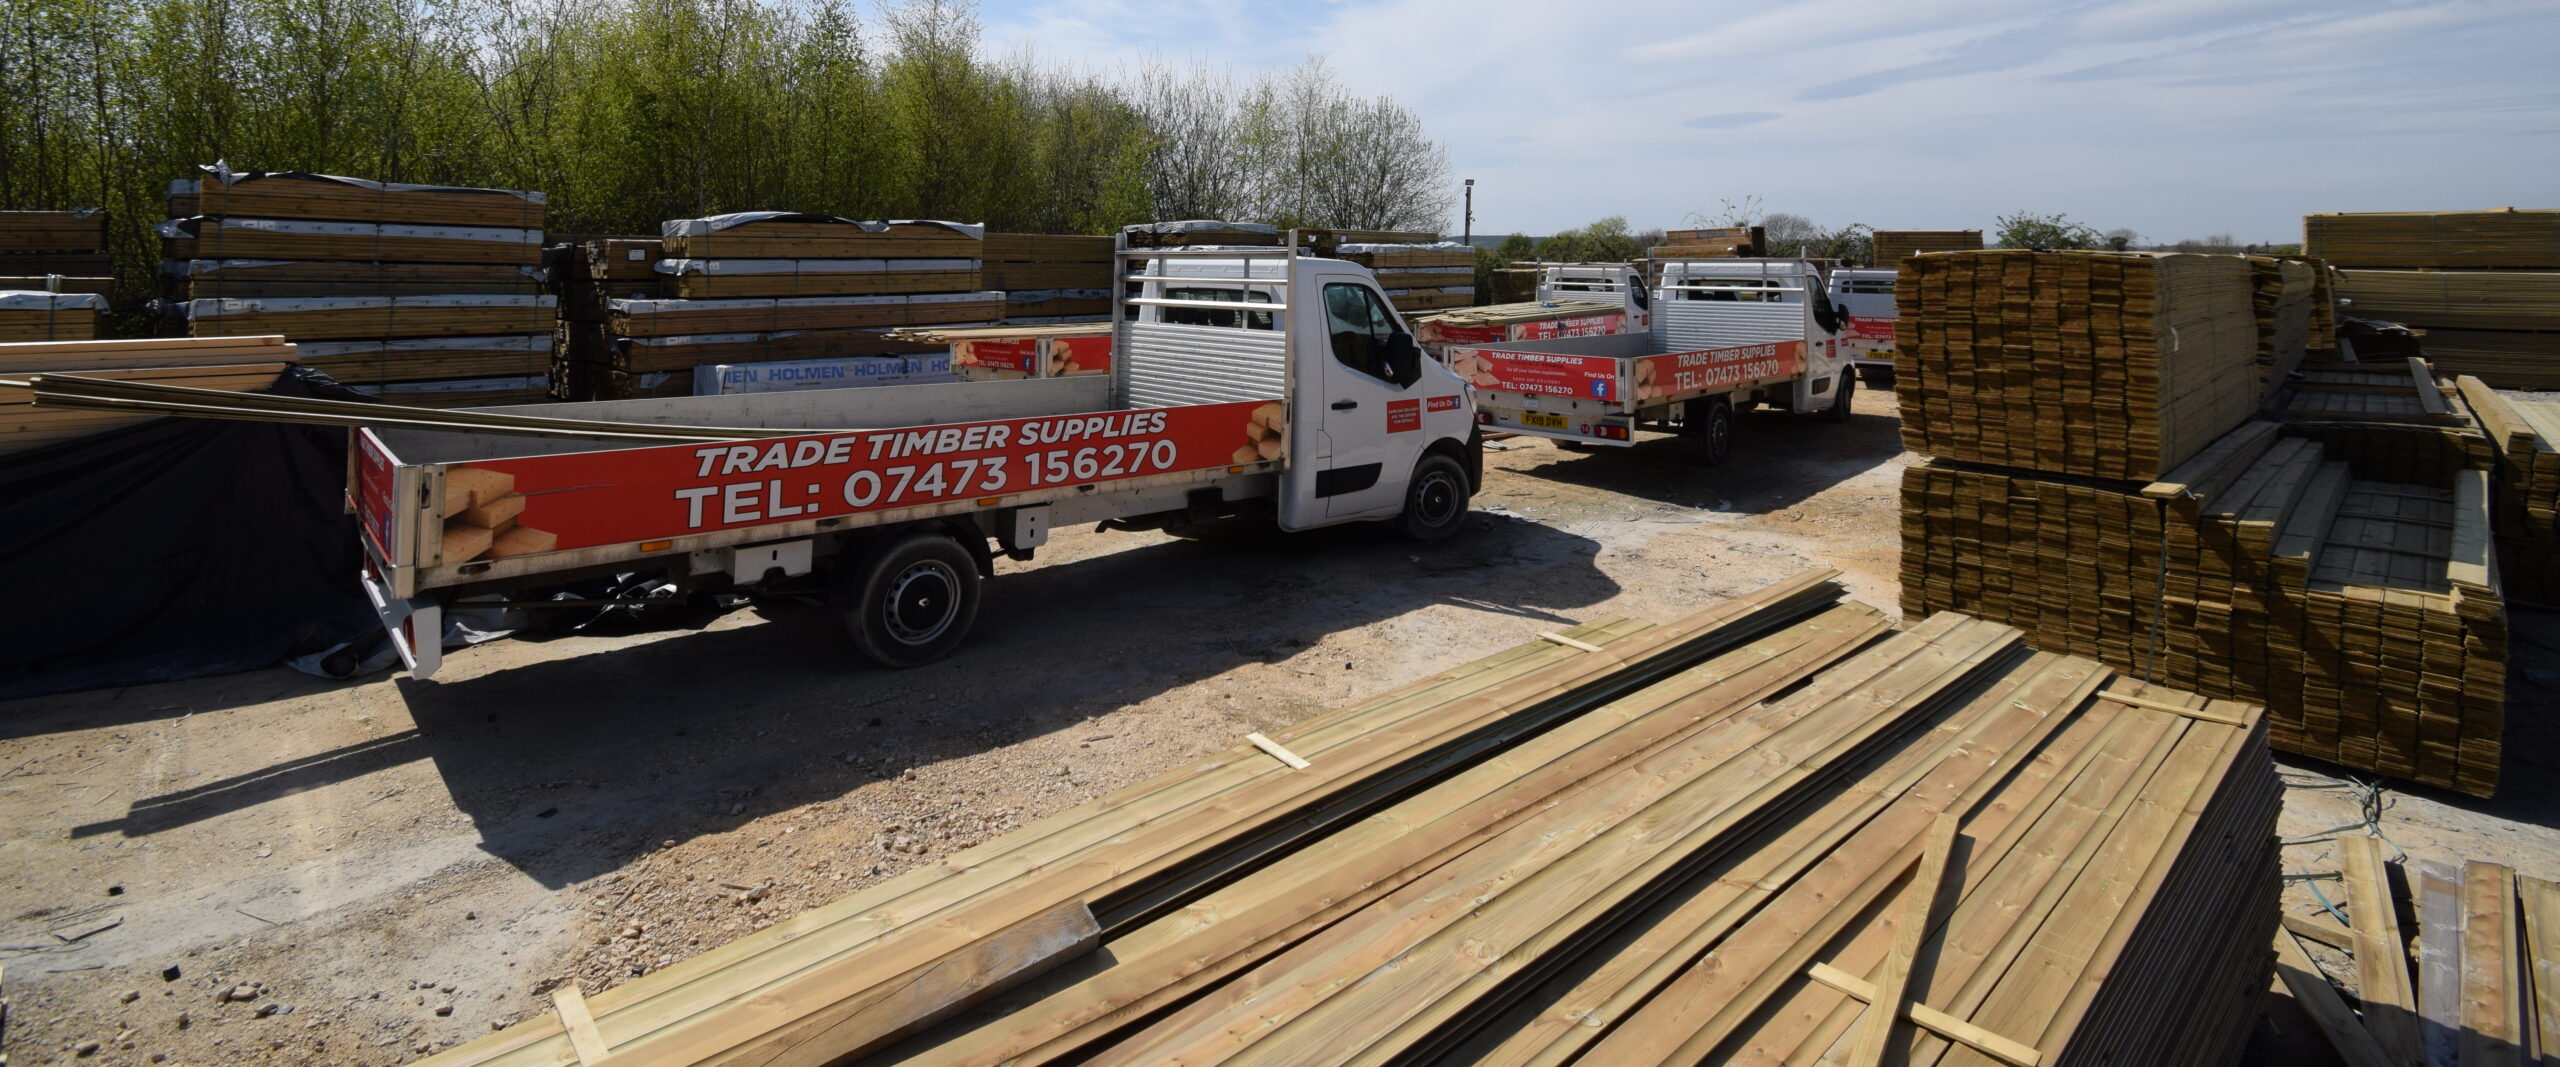 Trade Timber Supplies Ltd Timber Supplier Mansfield Get a quote